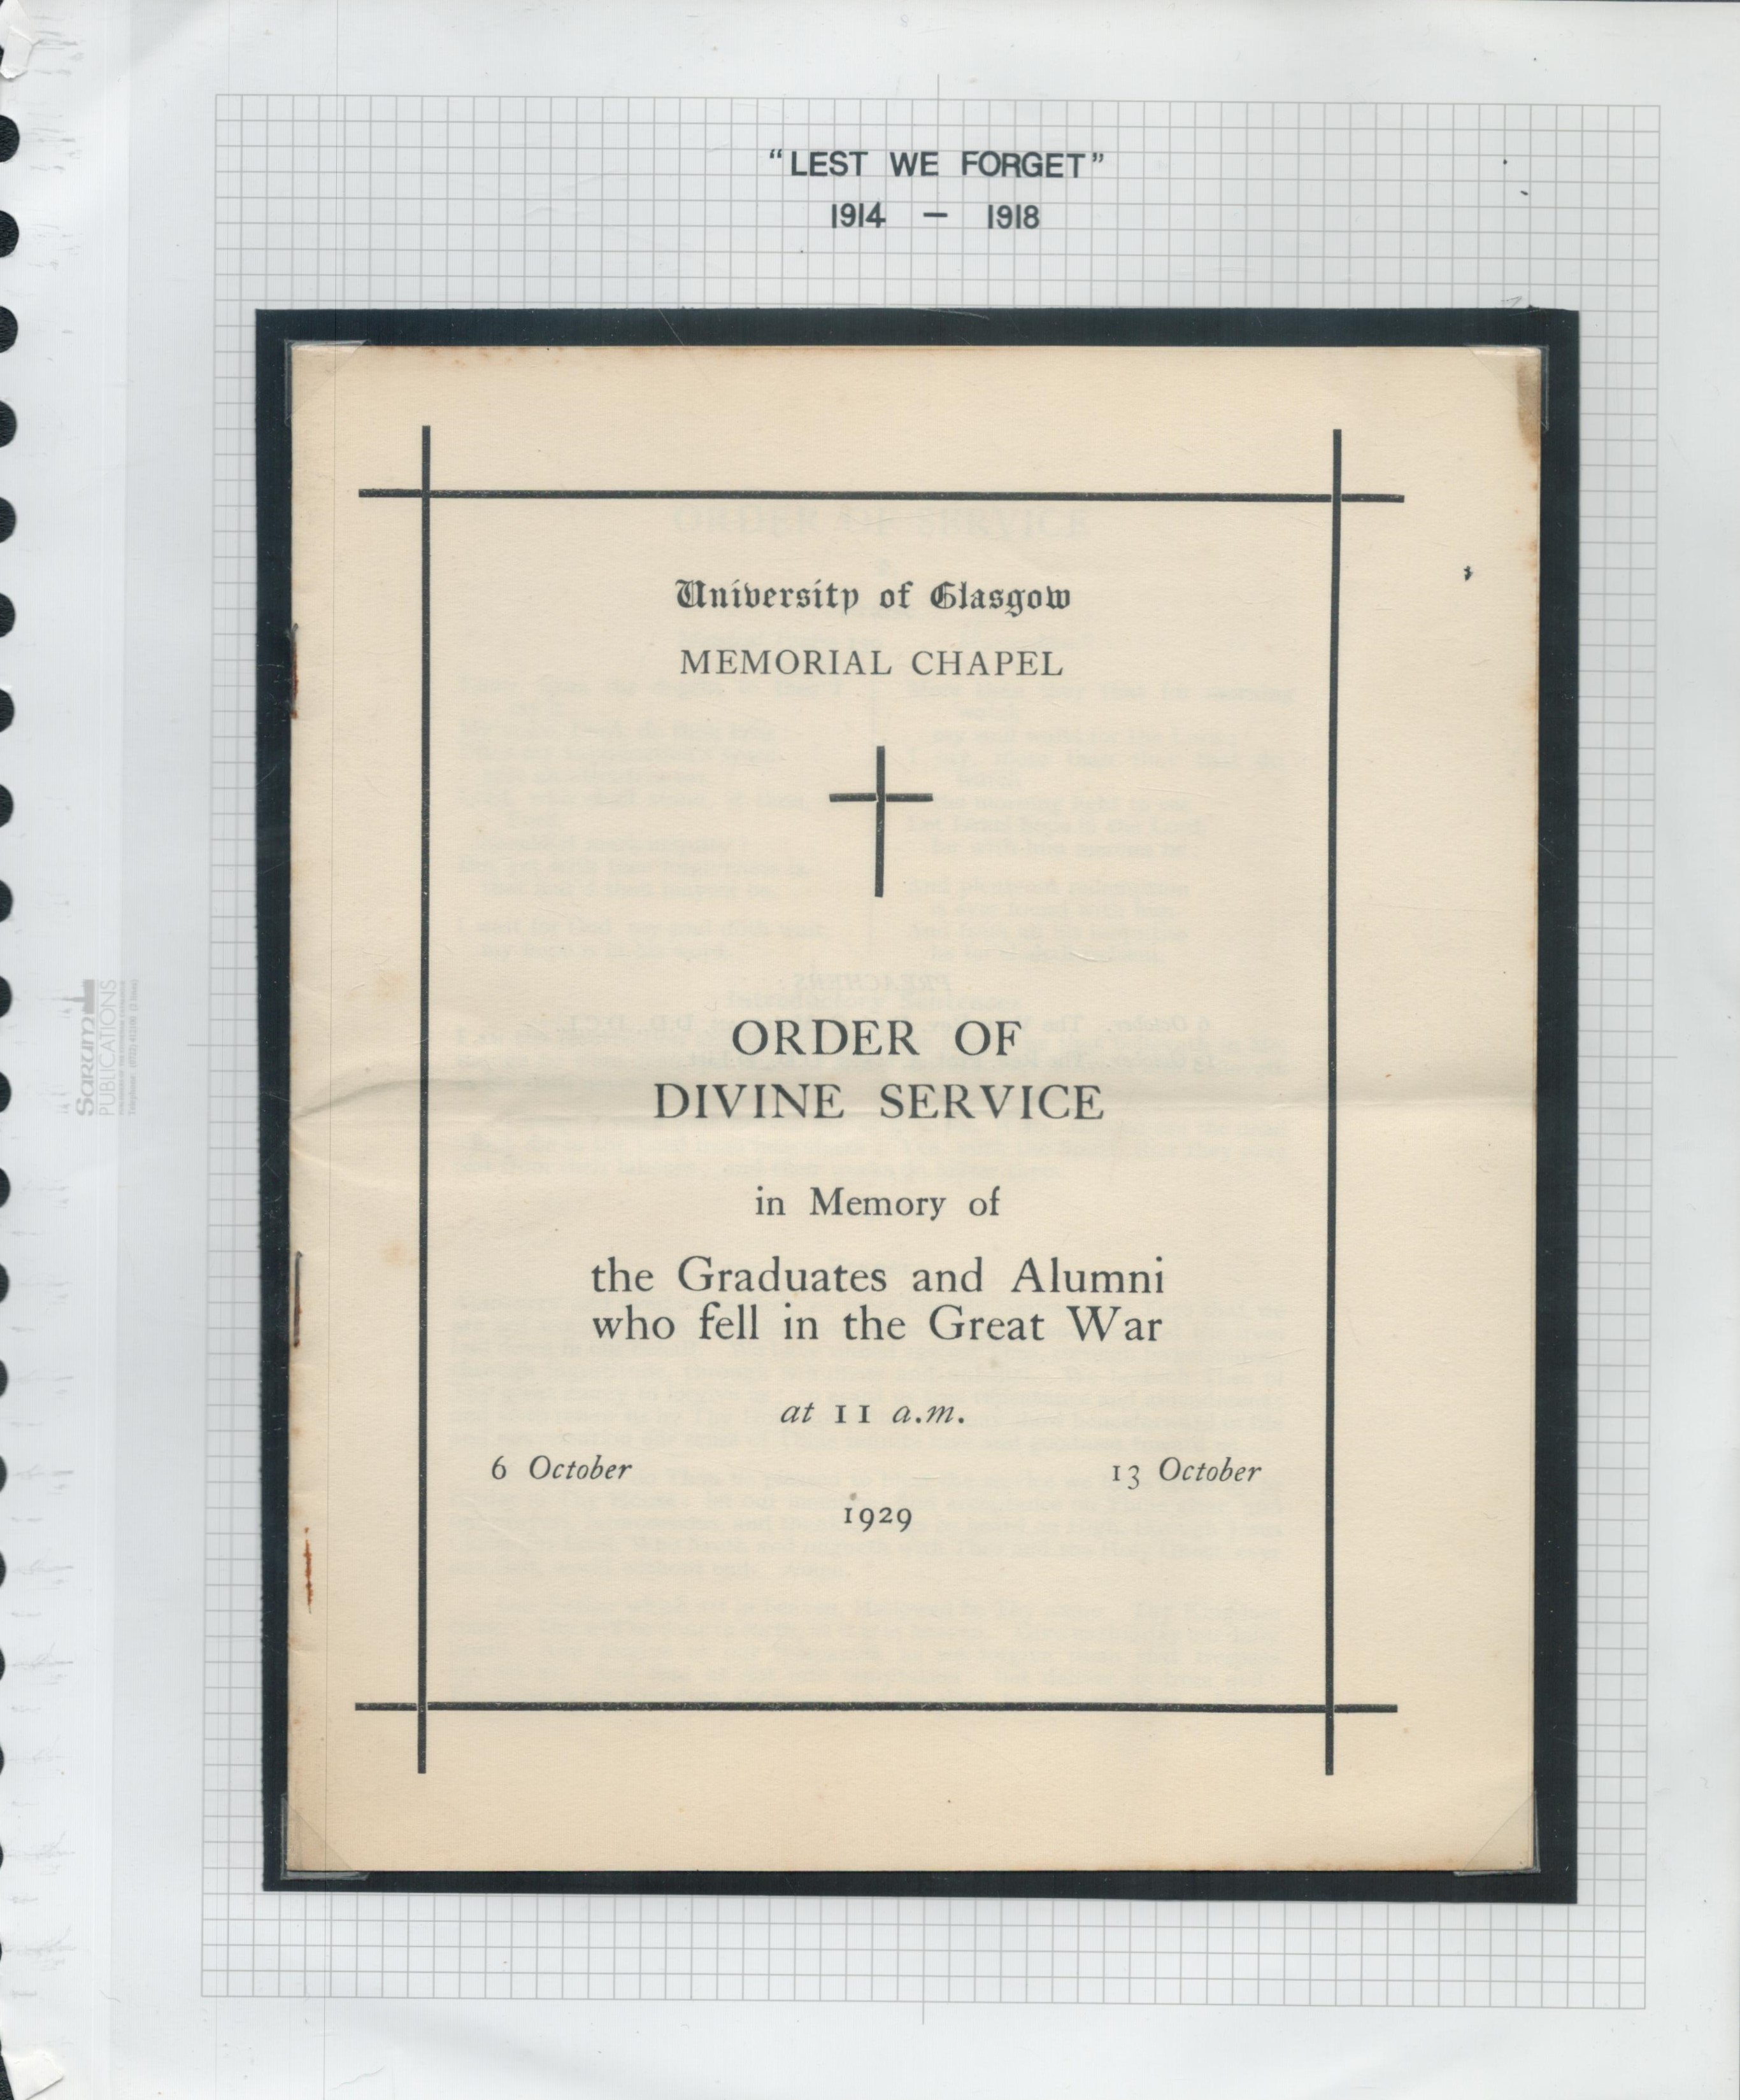 1929 Great War Order of service in Memory of the Graduates and Alumni killed in WWI held at